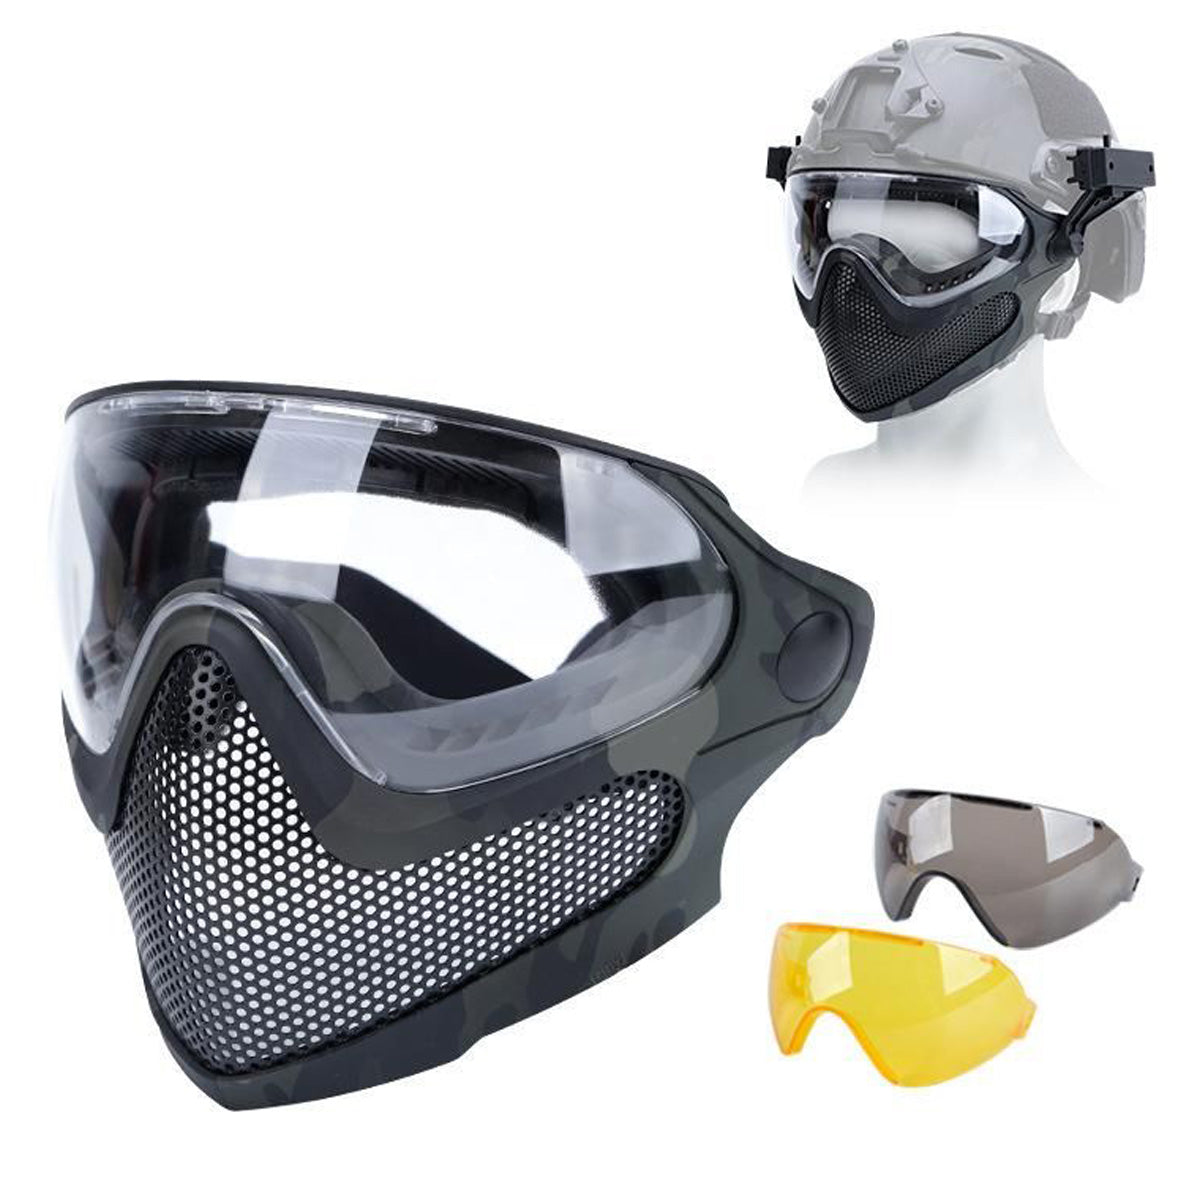 WOSPORT PILOT MASK STEEL MESH VERSION FOR AIRSOFT